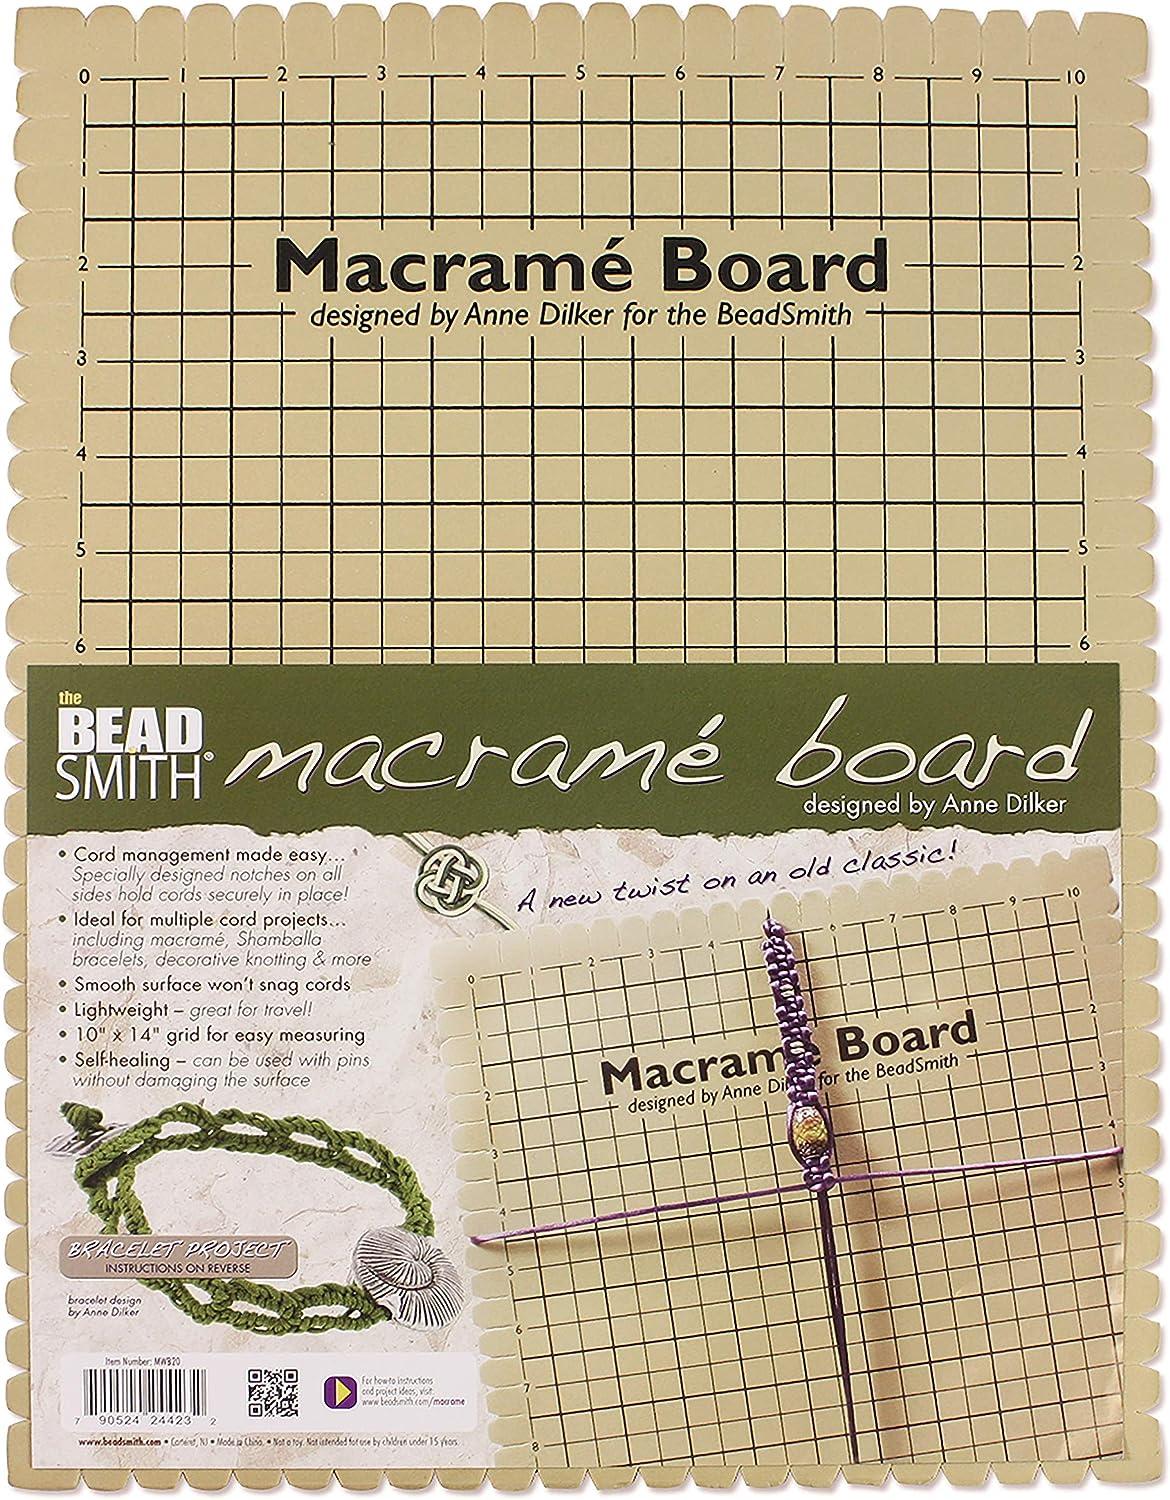 The Beadsmith Macrame Board 11.5 x 15.5 inches 0.5-inch-Thick Foam 10x14  Grid for Measuring Bracelet Project with Instructions Included Create  Macrame and Knotting Creations 14 Inches X 10 Inches